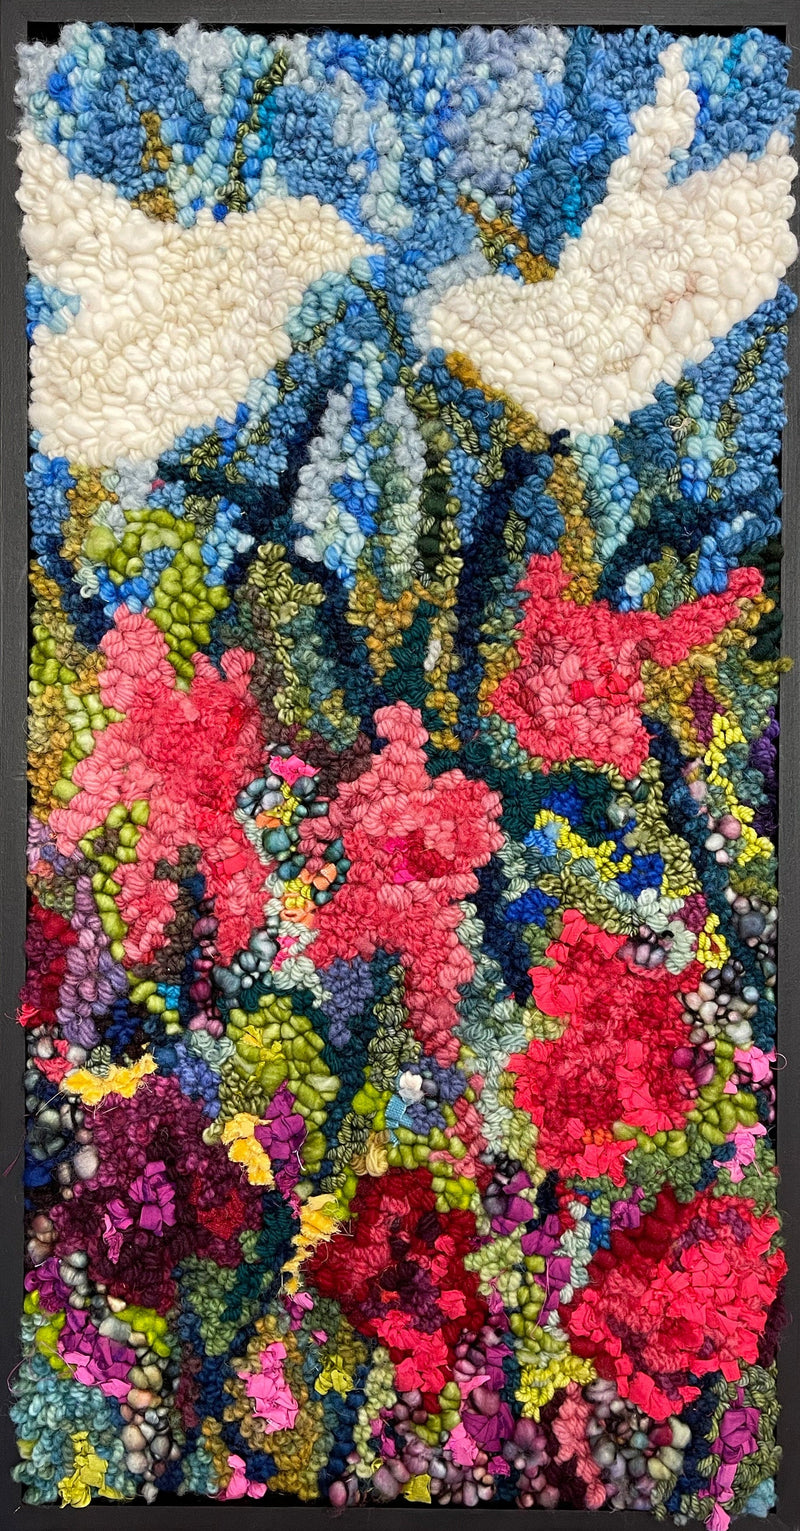 update alt-text with template Ruby Lilies 12" x 23" Framed-Deanne Fitzpatrick Rug Hooking Studio-Rug Hooking Kit -Rug Hooking Pattern -Rug Hooking -Deanne Fitzpatrick Rug Hooking Studio -Is rug hooking the same as punch needle?